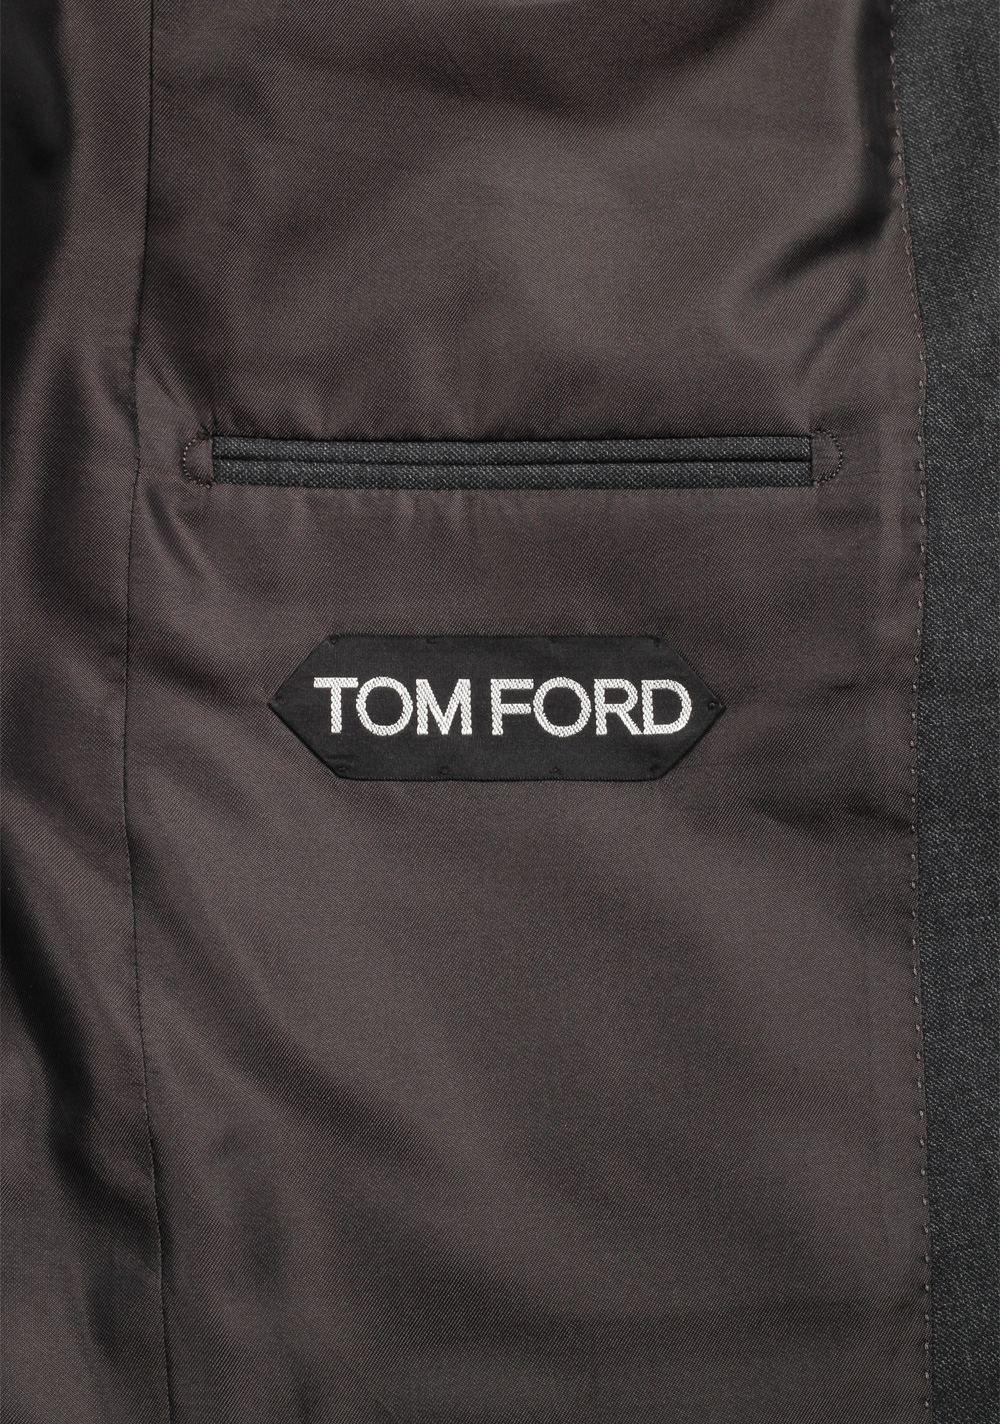 TOM FORD Windsor Gray 3 Piece Suit Size 52 / 42R U.S. Wool Fit A ...